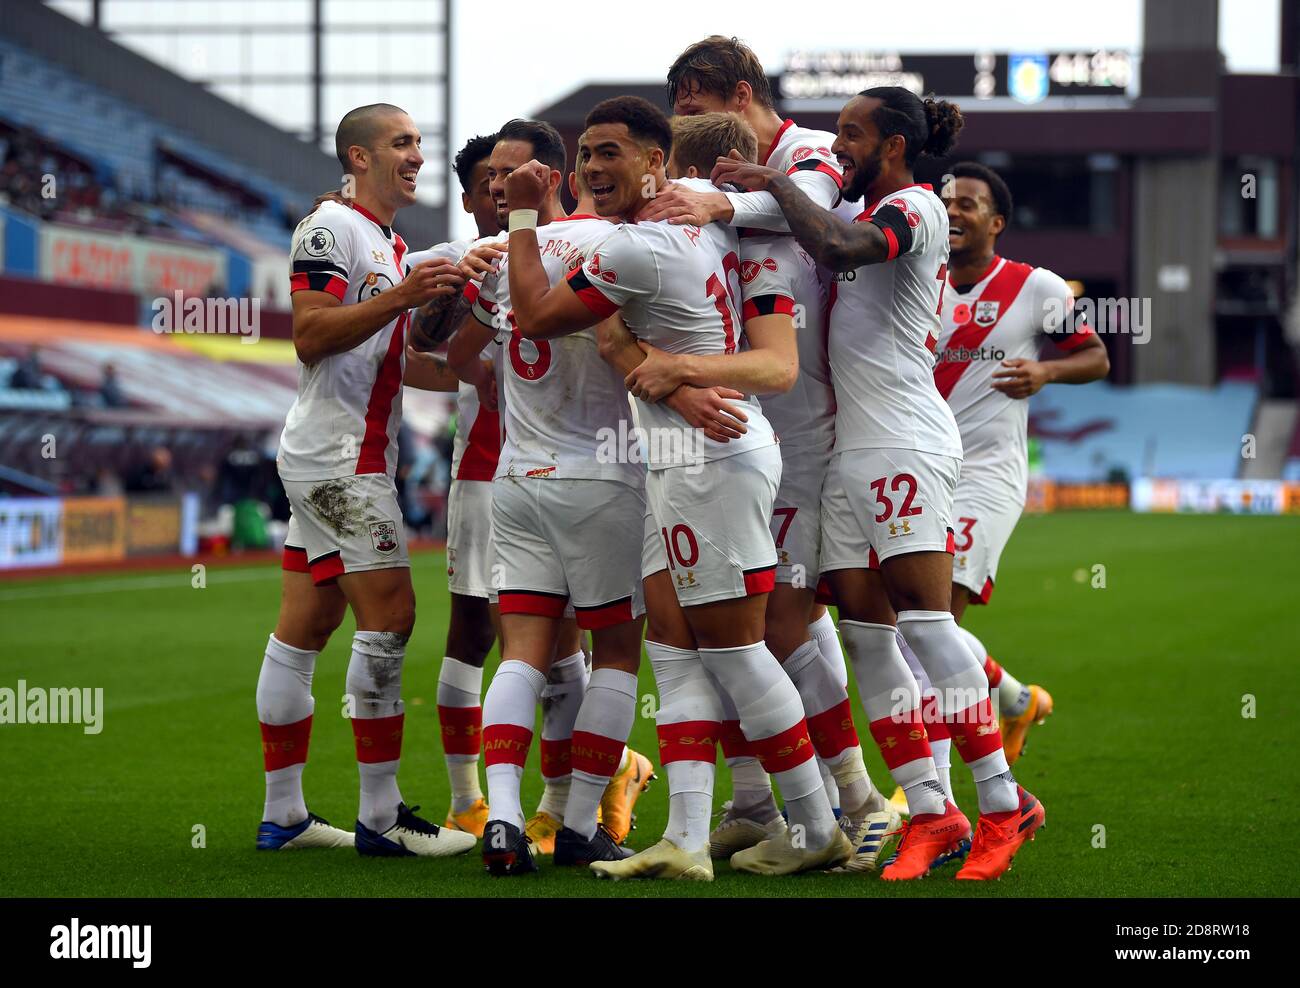 Southampton's James Ward-Prowse celebrates scoring his side's third goal of the game with his team-mates during the Premier League match at Villa Park, Birmingham Stock Photo